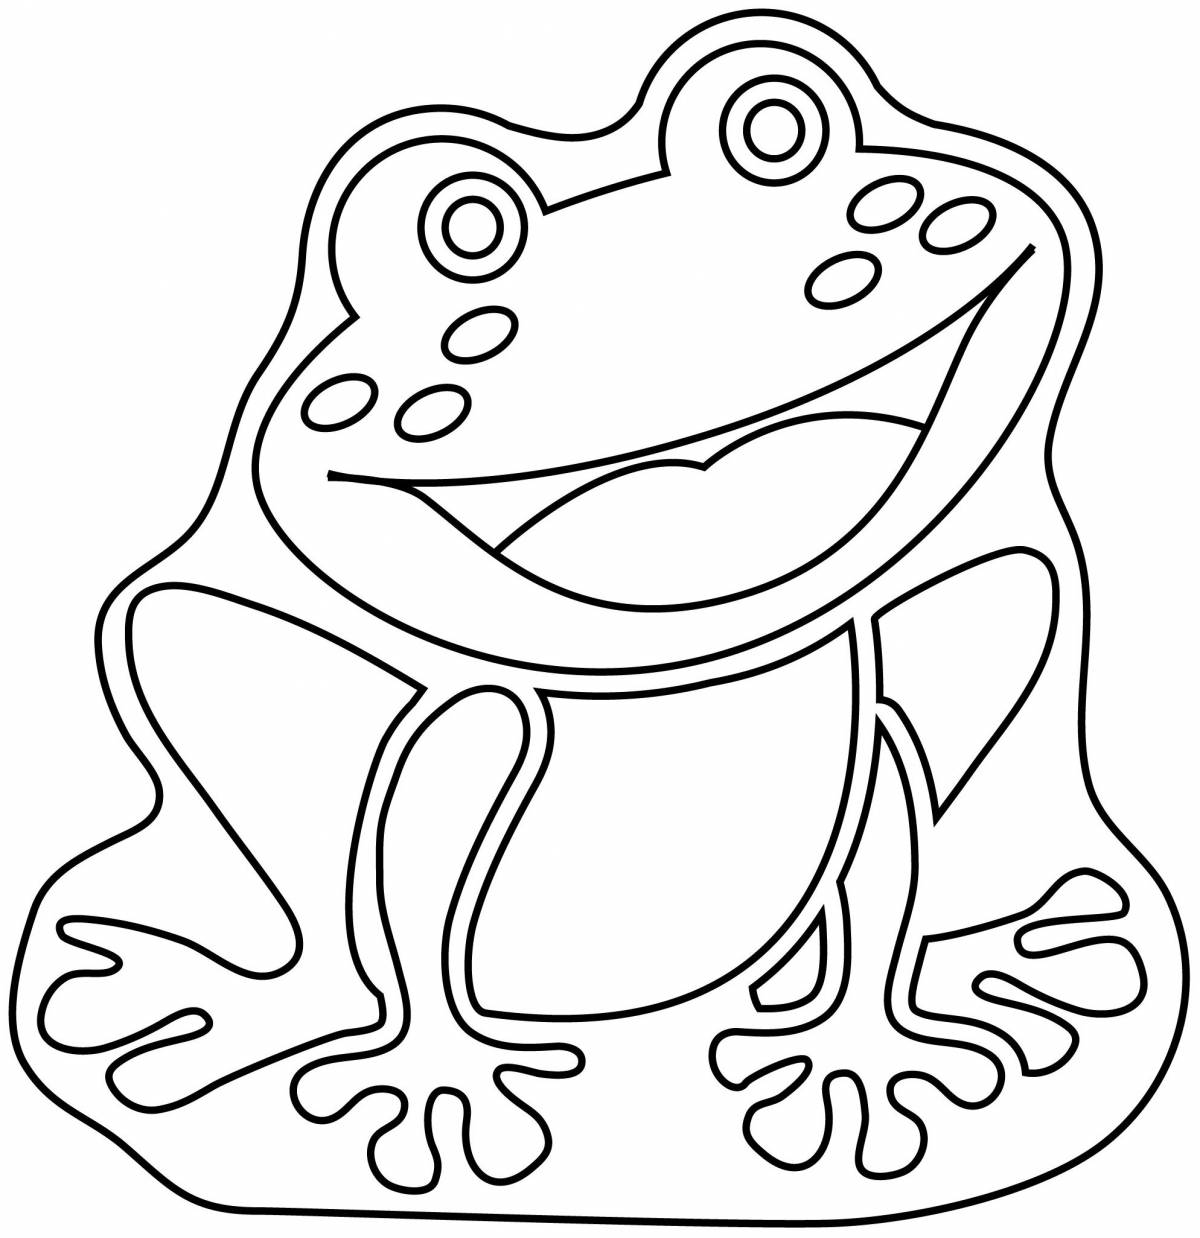 Great frog coloring book for the little ones